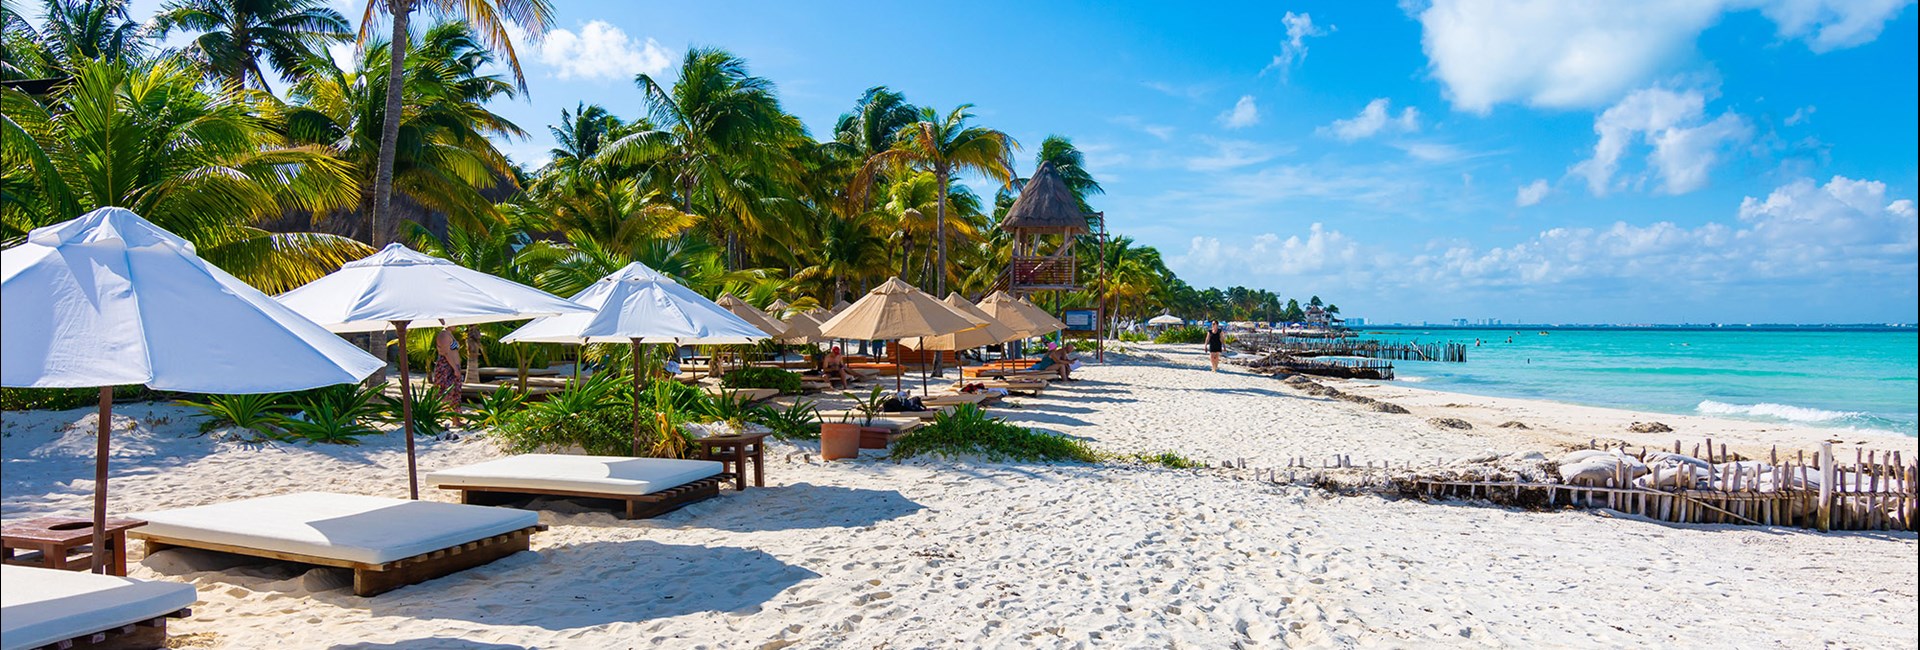 Sun beds with white umbrellas lines up along tropical white sand beach 